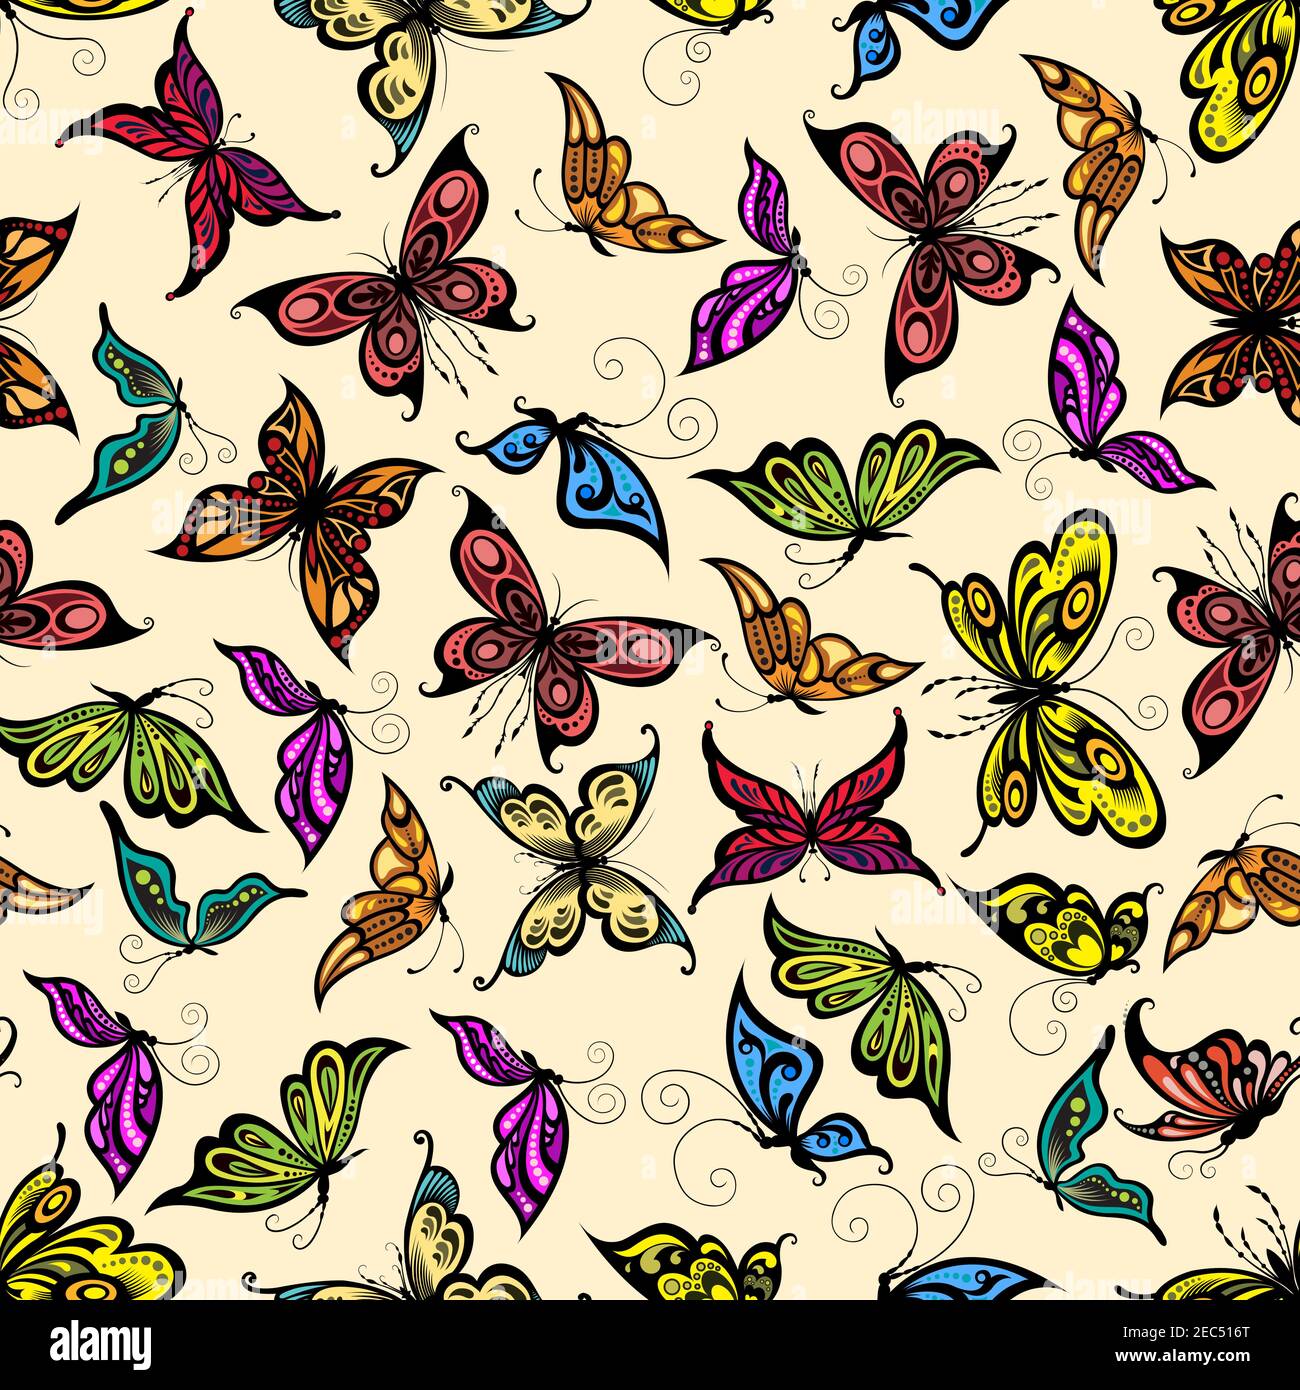 Tropical butterflies seamless pattern with flying summer insects, adorned by ornaments of swirling lines on delicate peach background Stock Vector